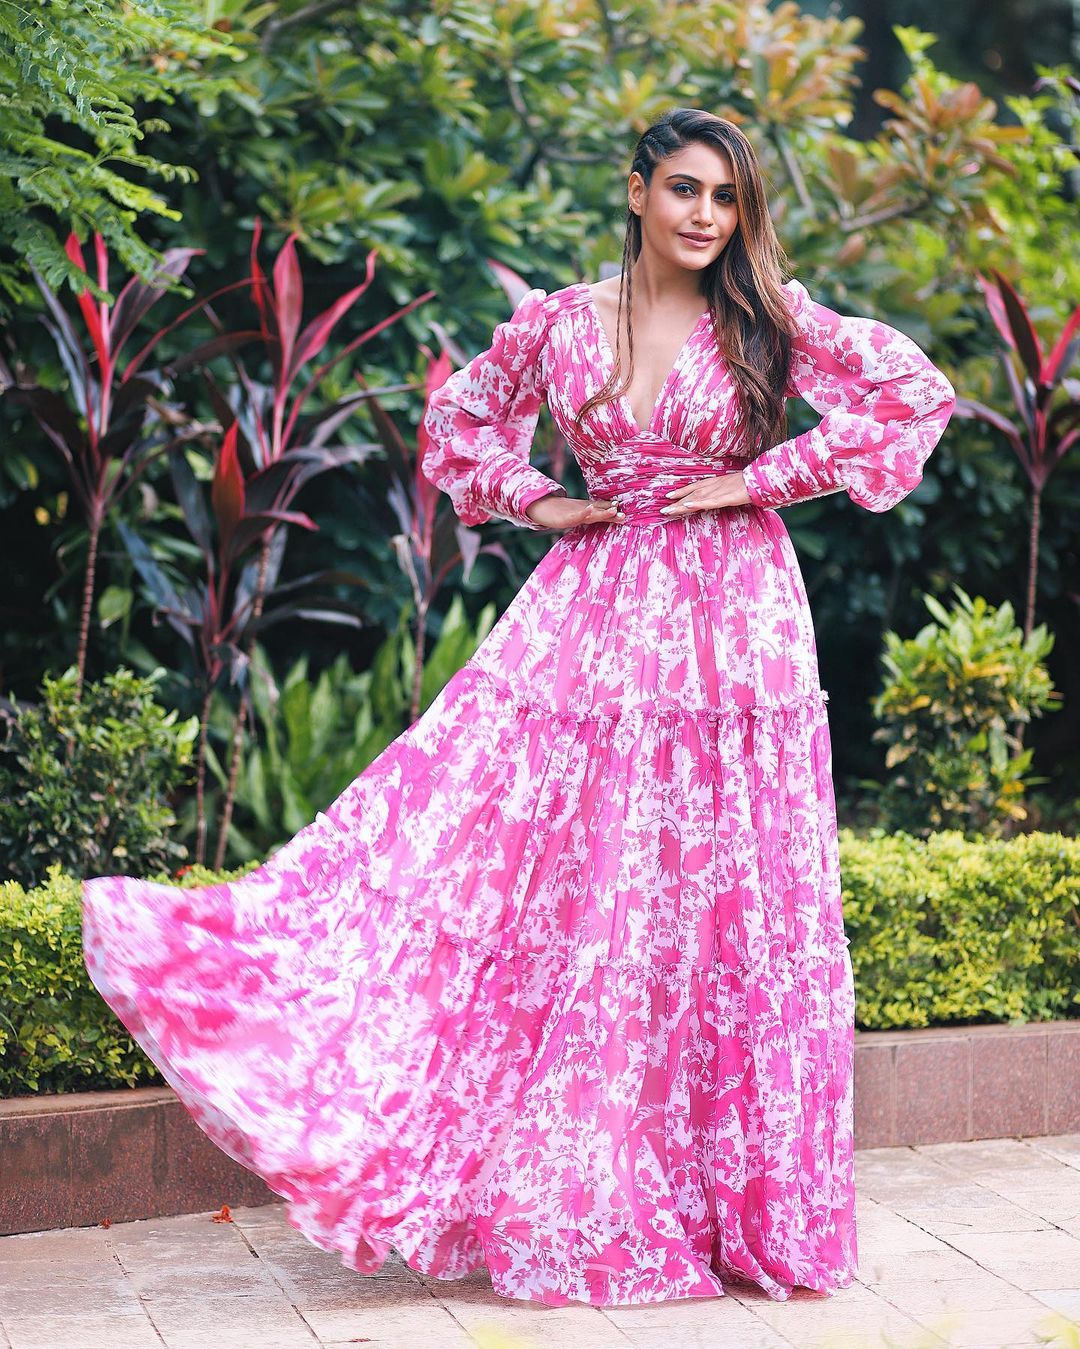  Surbhi Chandna of 'Naagin' fame took to Instagram to share pictures from her latest photoshoot. The actress can be seen in a pink floral maxi dress. (Image: Instagram)